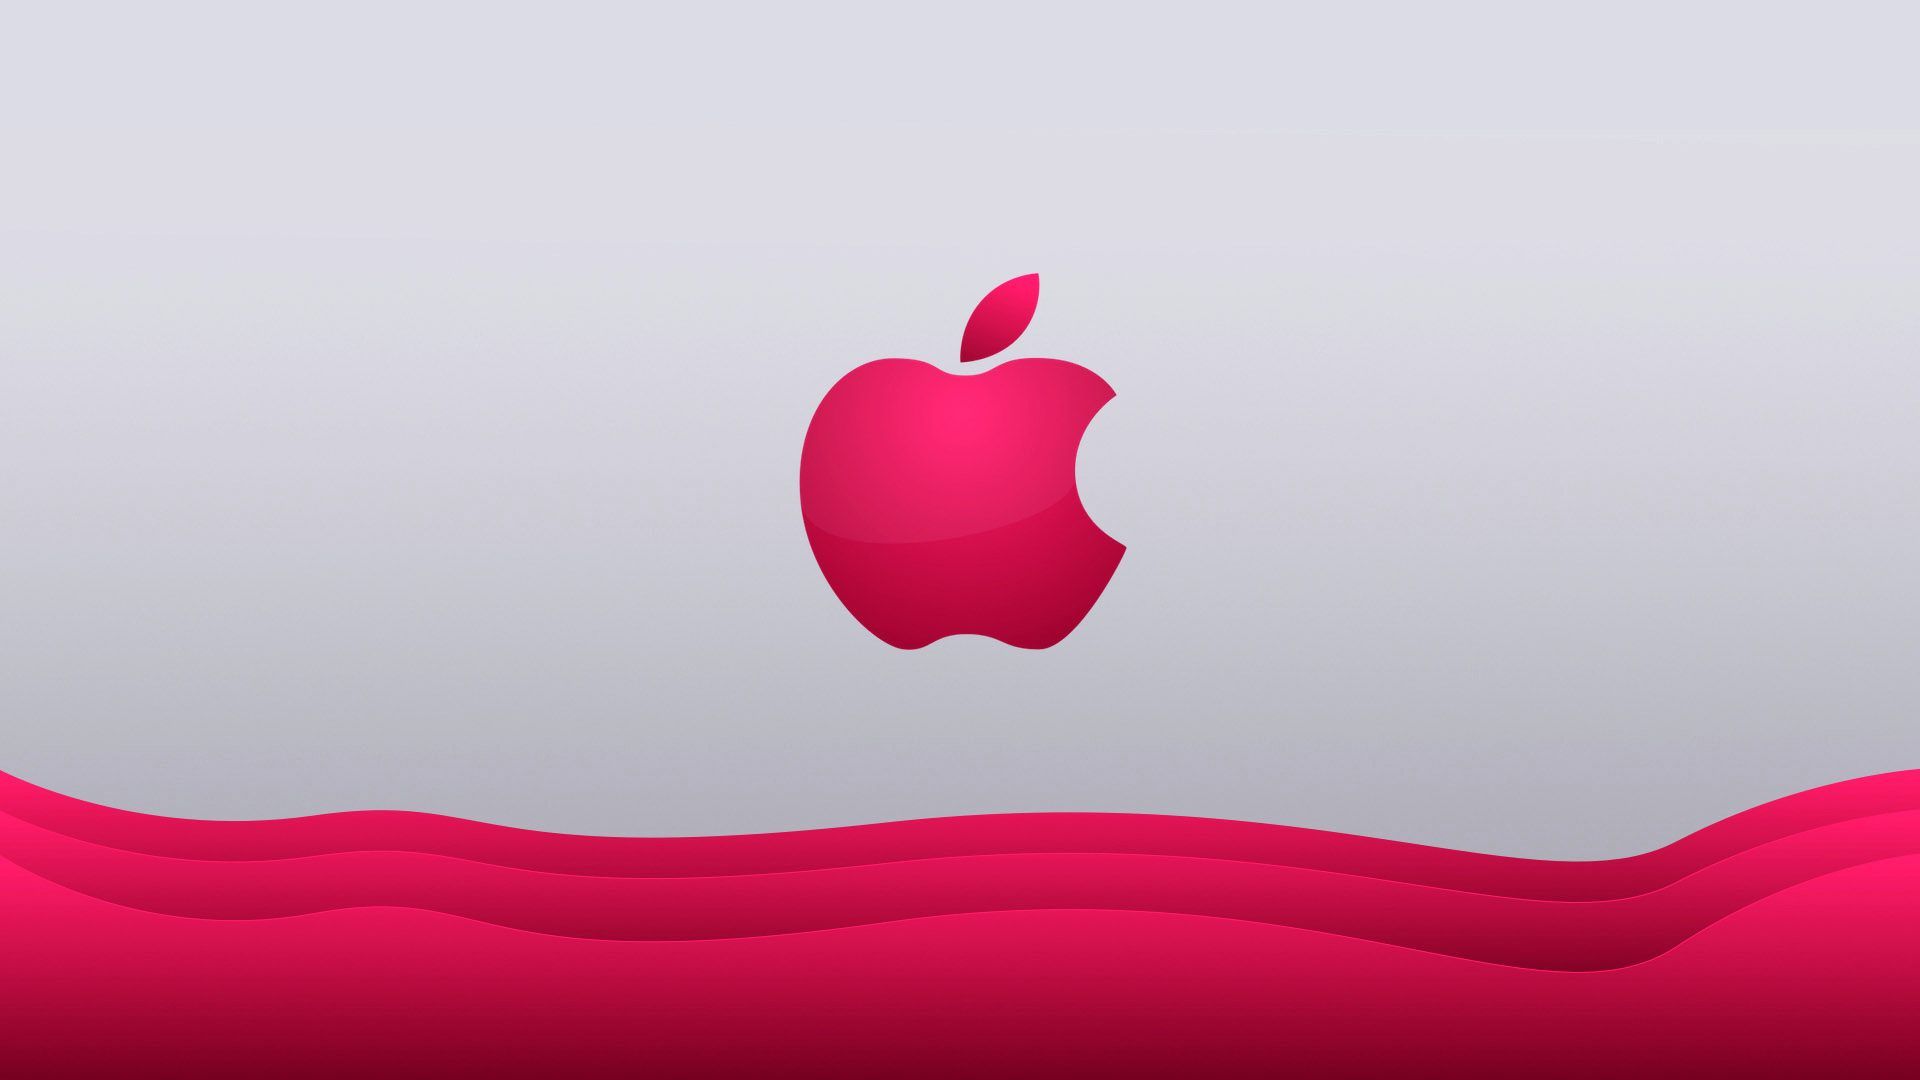 Apple Pink Best Quality Wallpapers Pic Wsw2054331 - Cool Apple Logo Wallpaper Pink - HD Wallpaper 